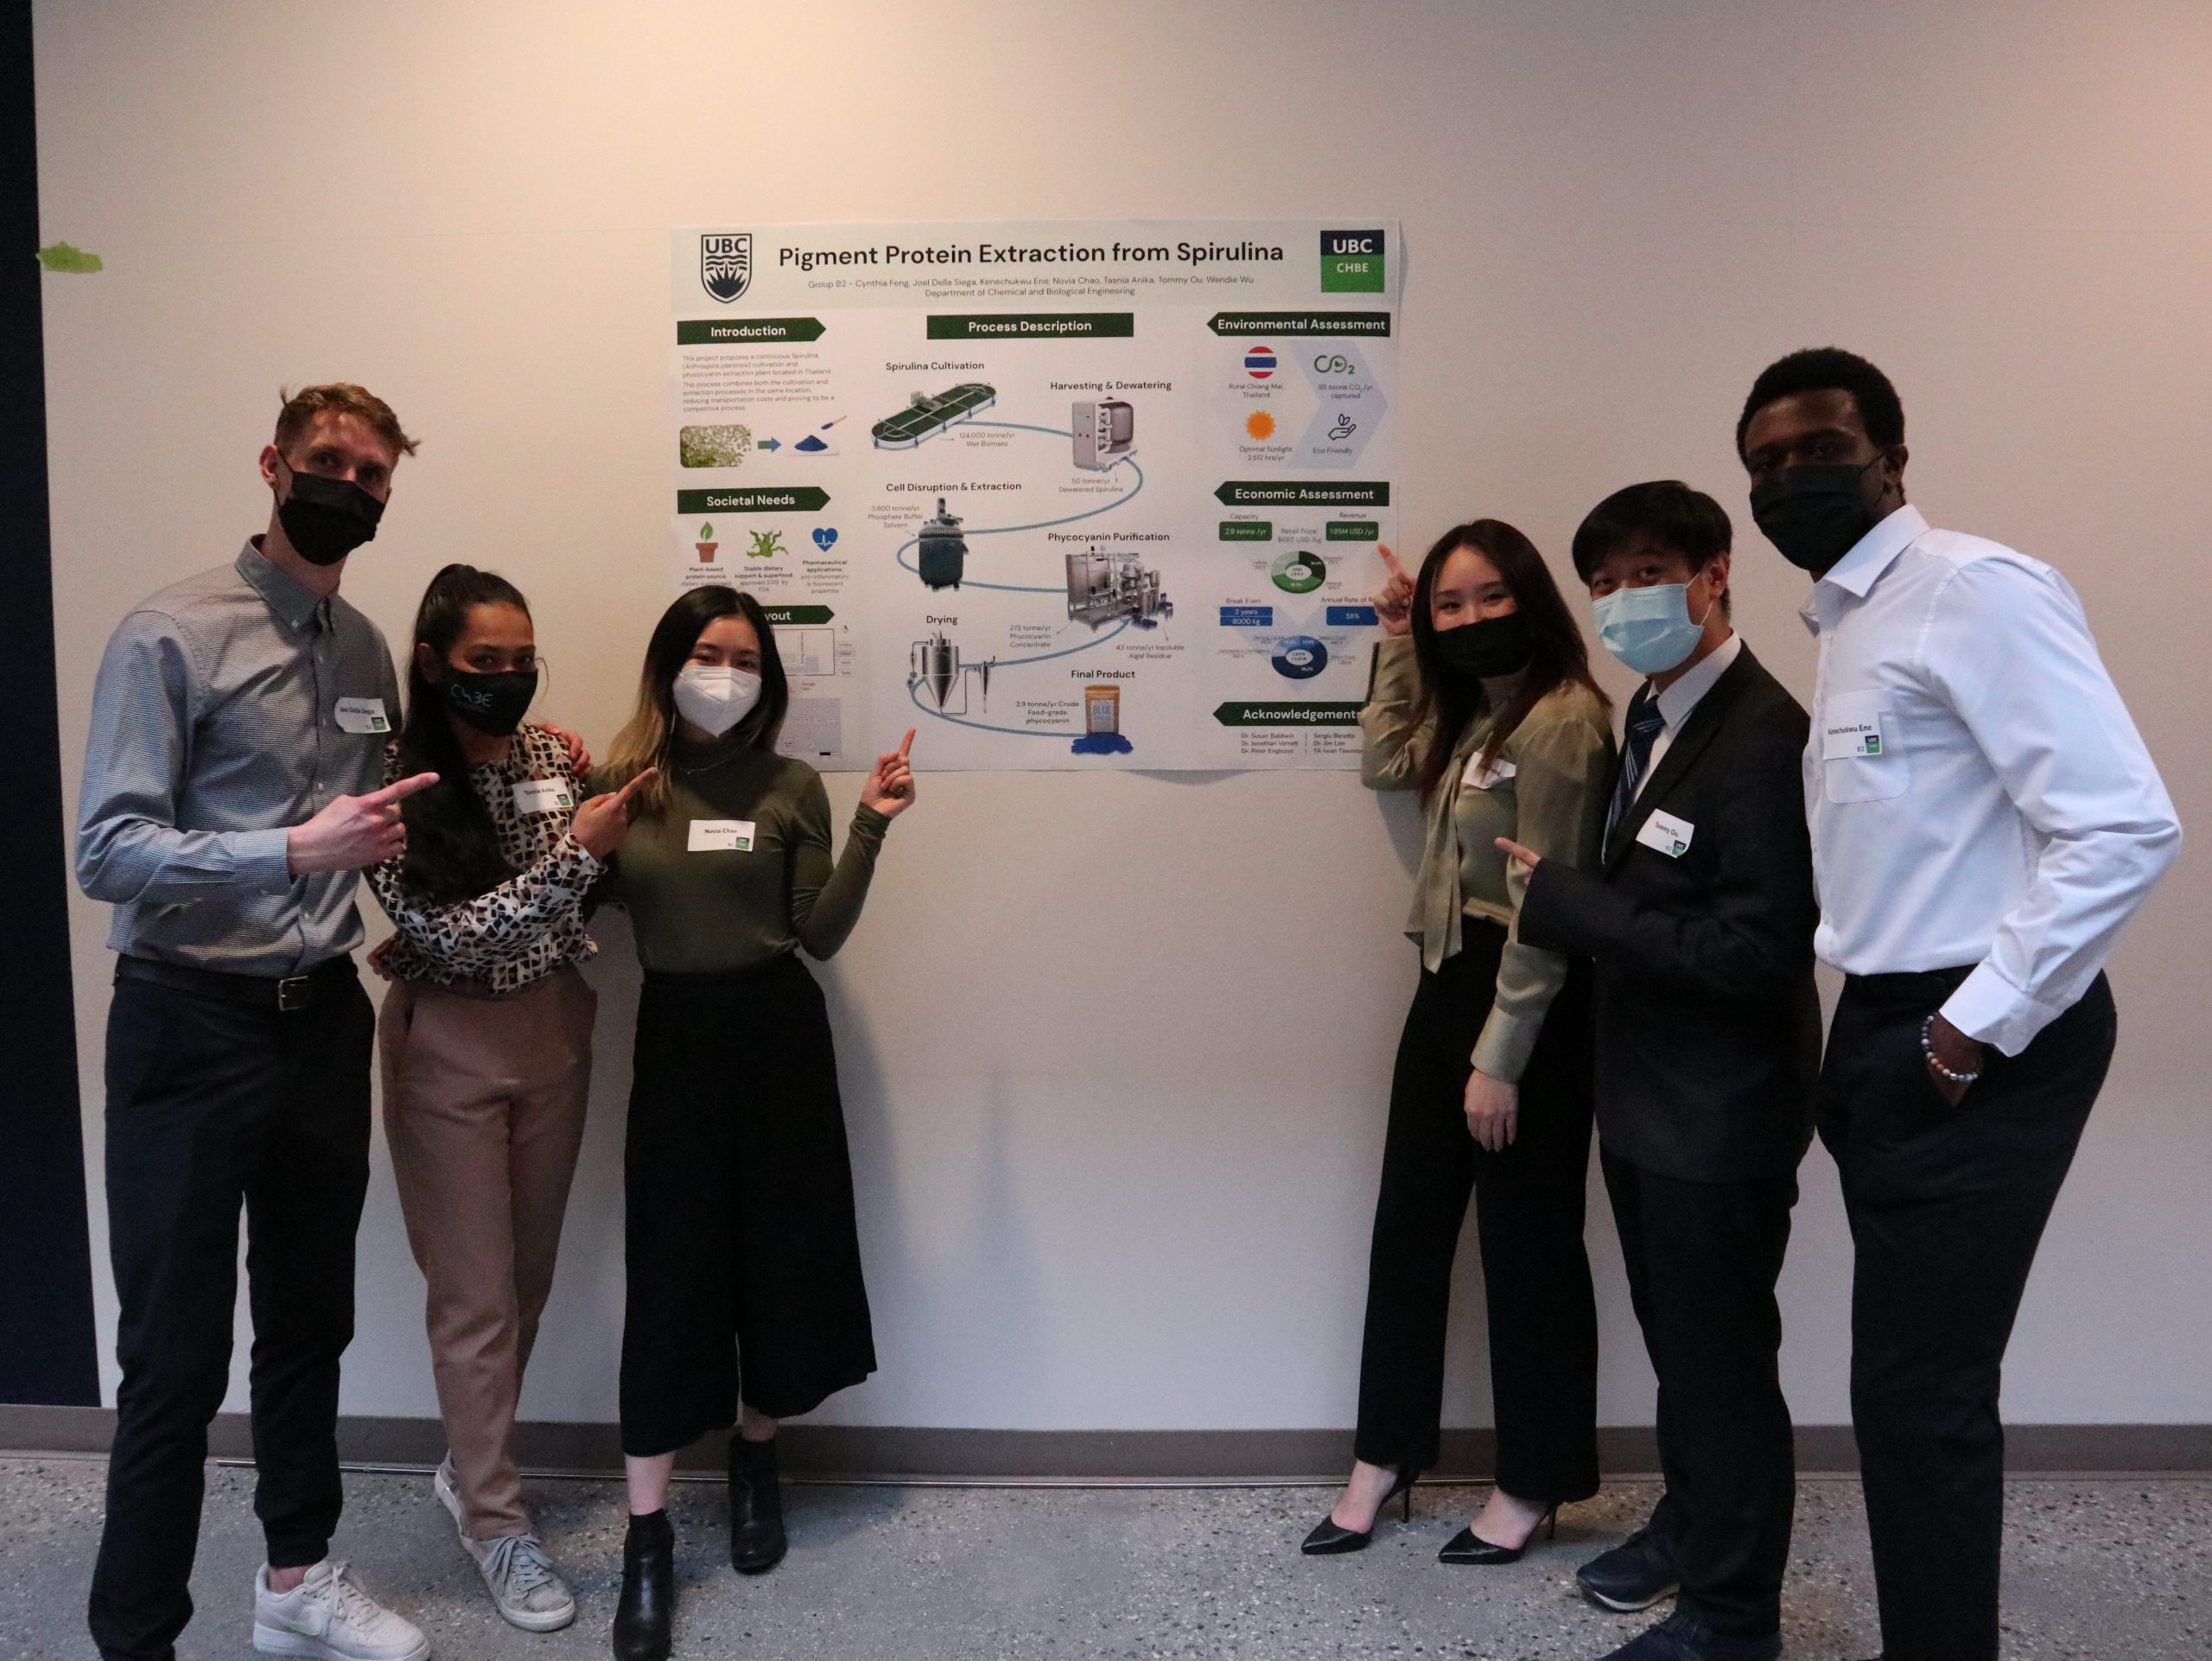 Image of group B2 pointing to poster. 6 people in photo